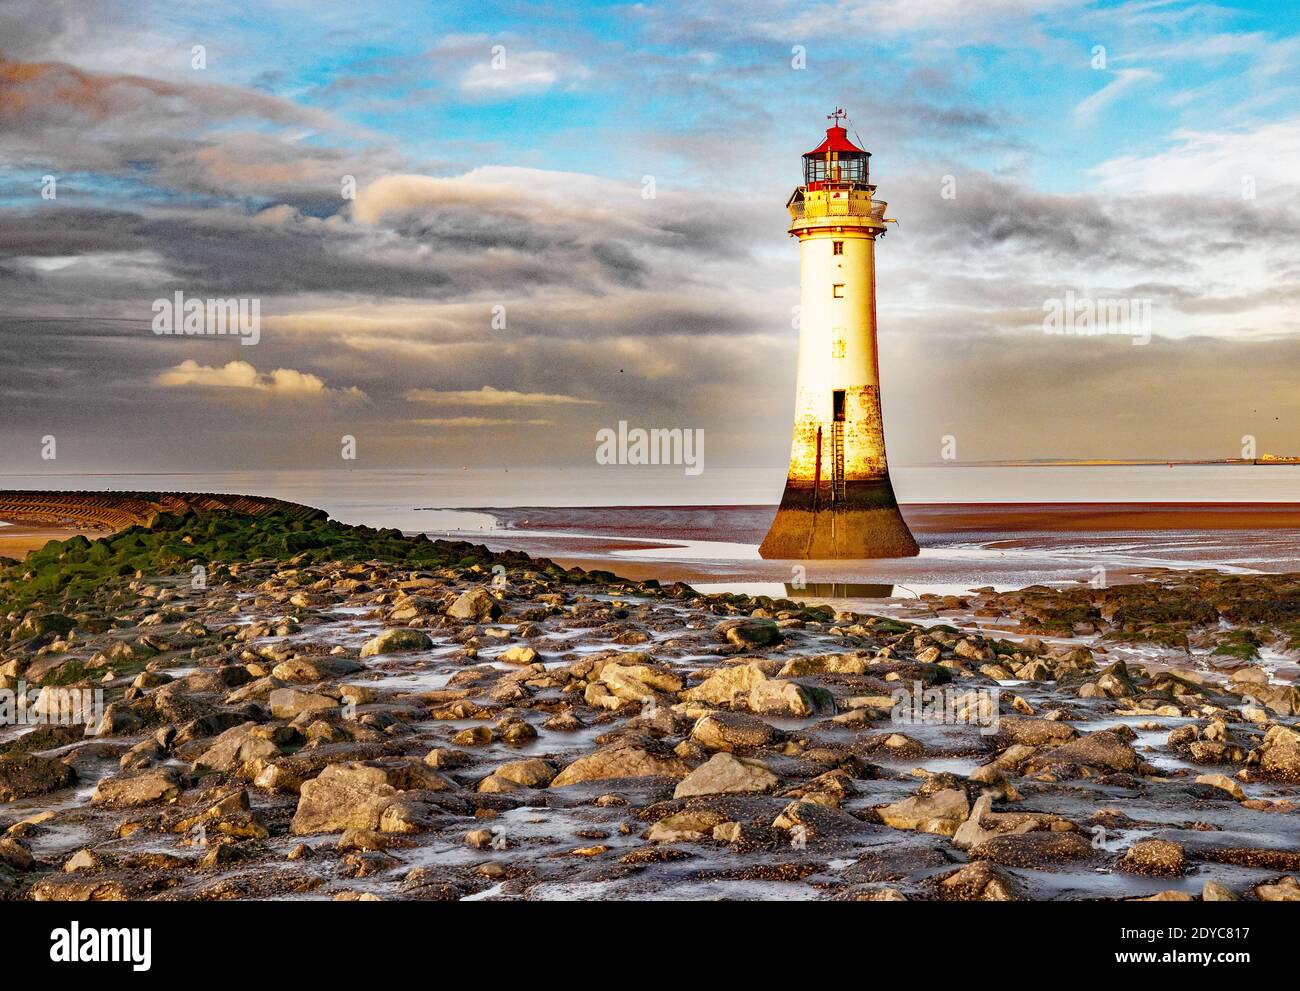 The New Brighton Lighthouse with the River Mersey on a stormy day Stock Photo